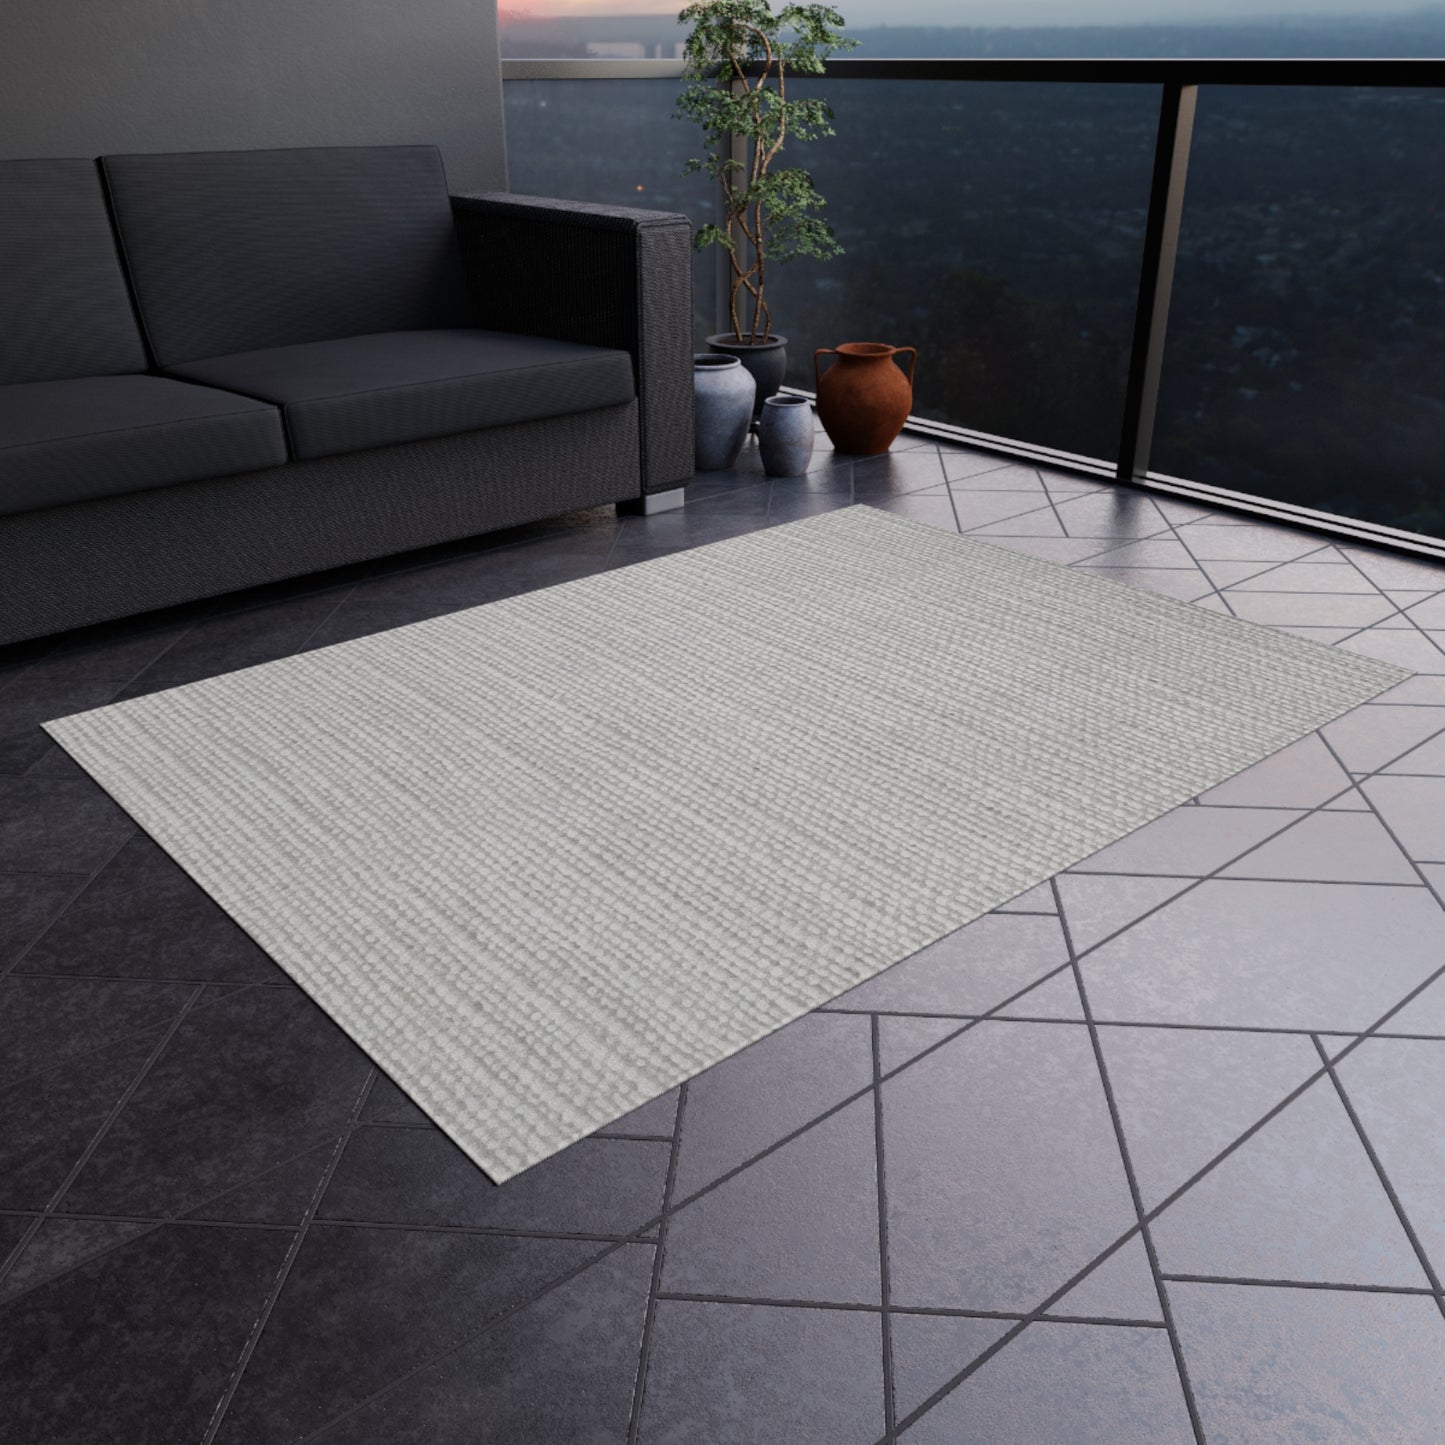 Chic White Denim-Style Fabric, Luxurious & Stylish Material - Outdoor Rug